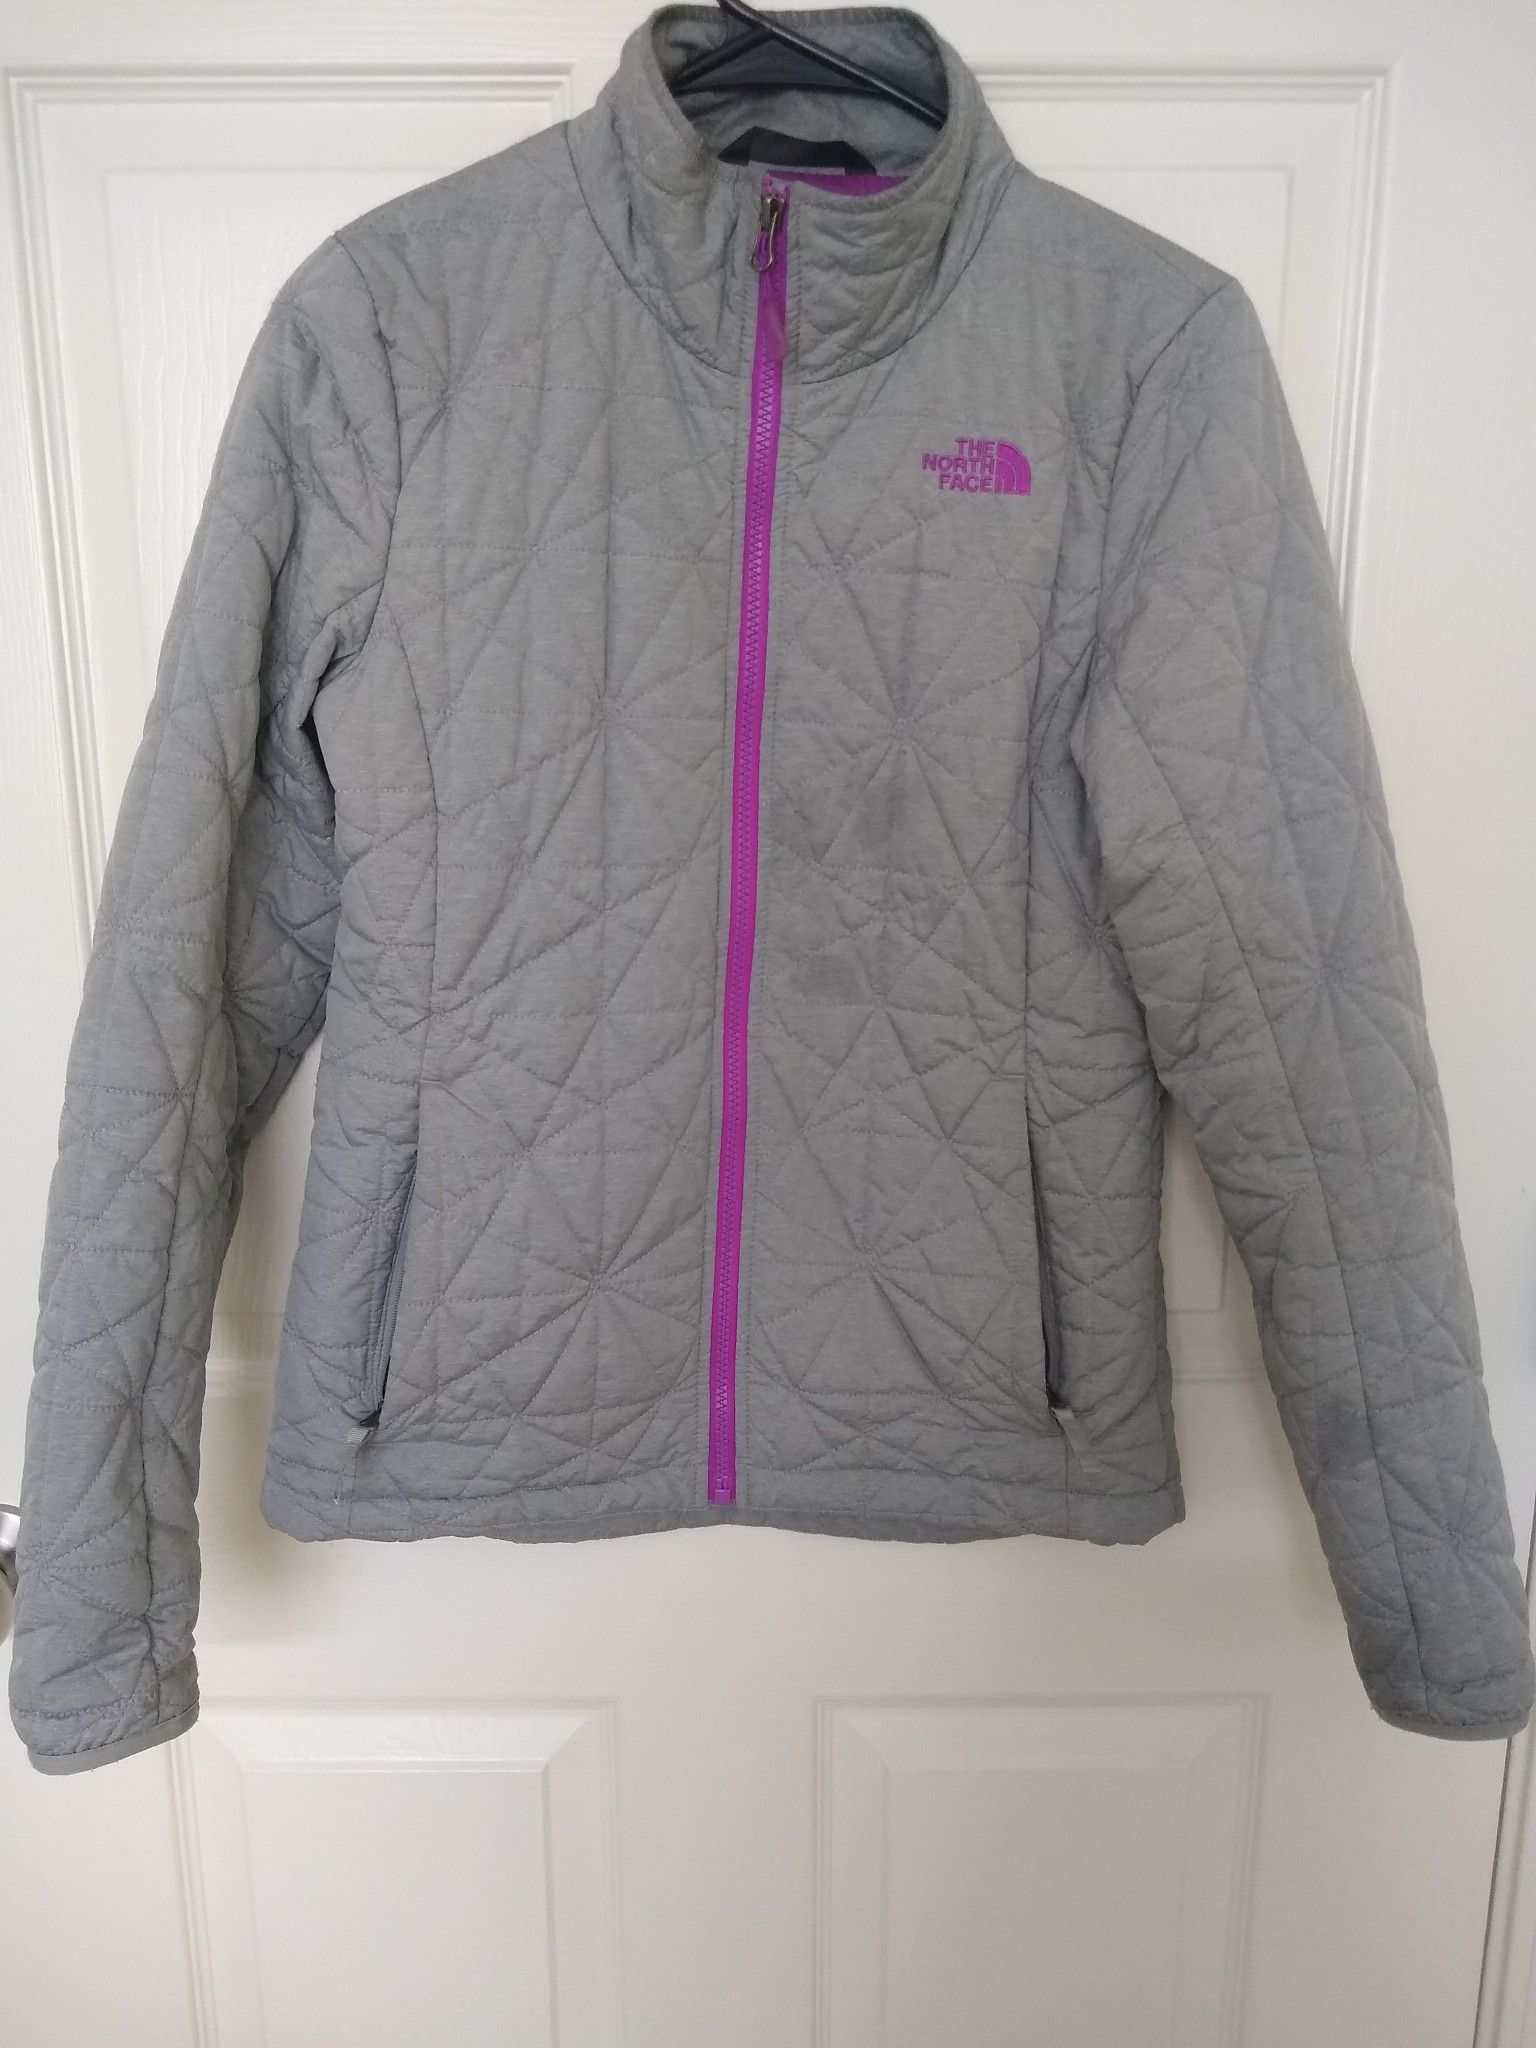 North Face Womens Jacket - Size S